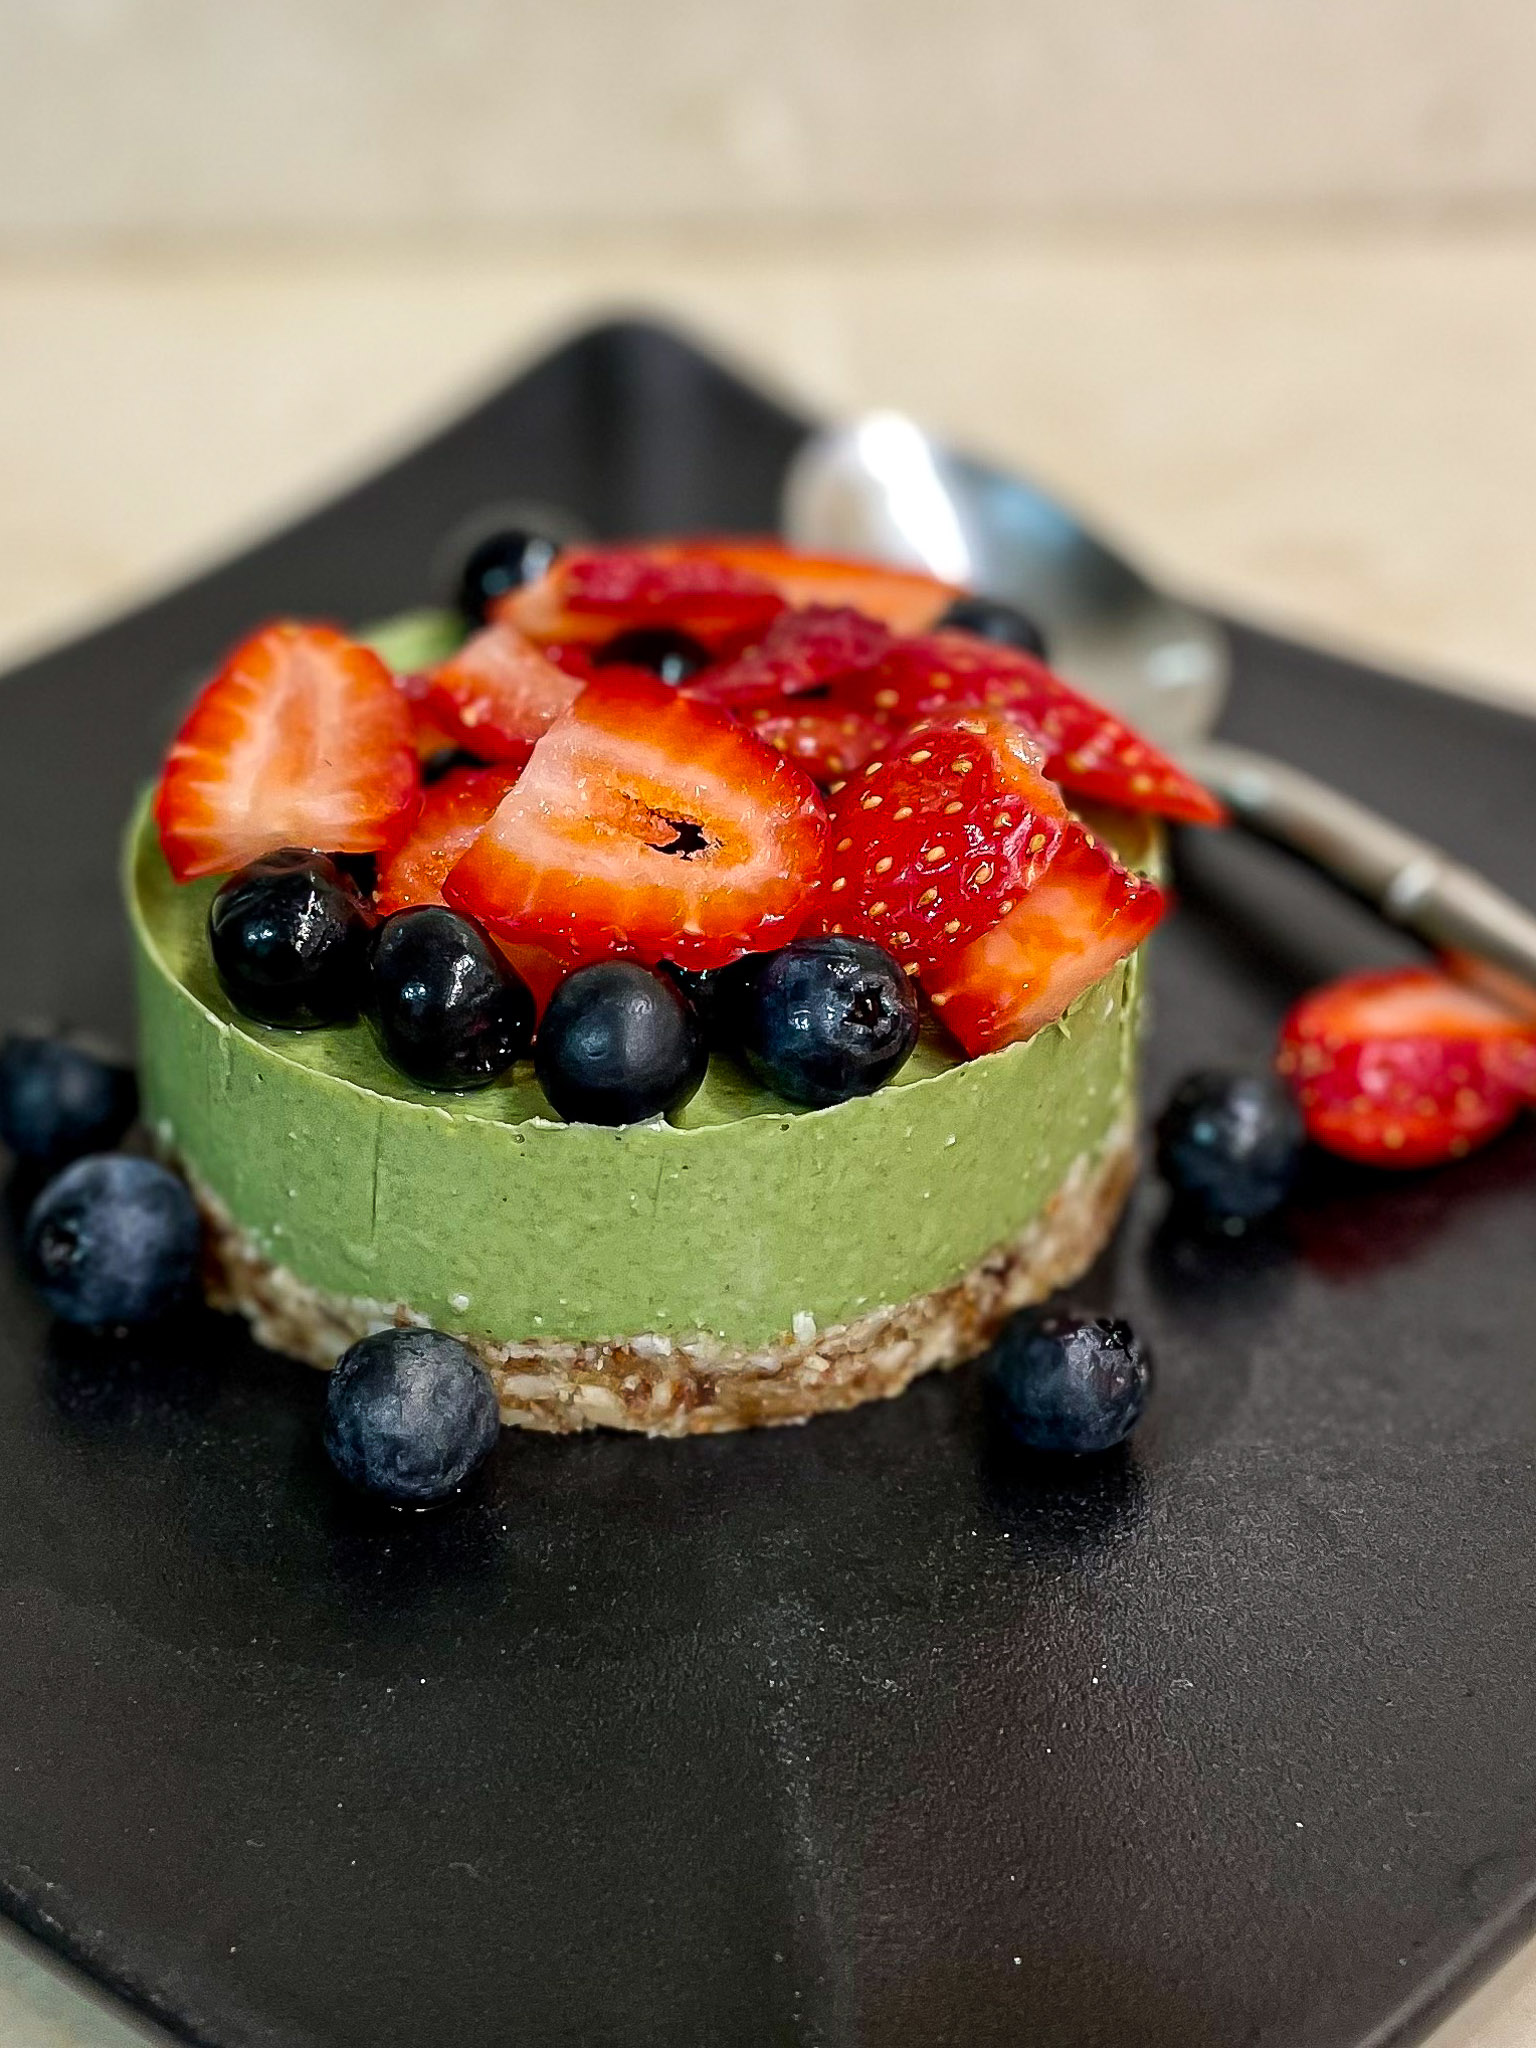 alt="a very green matcha mousse cake topped with fresh strawberries and blueberries."